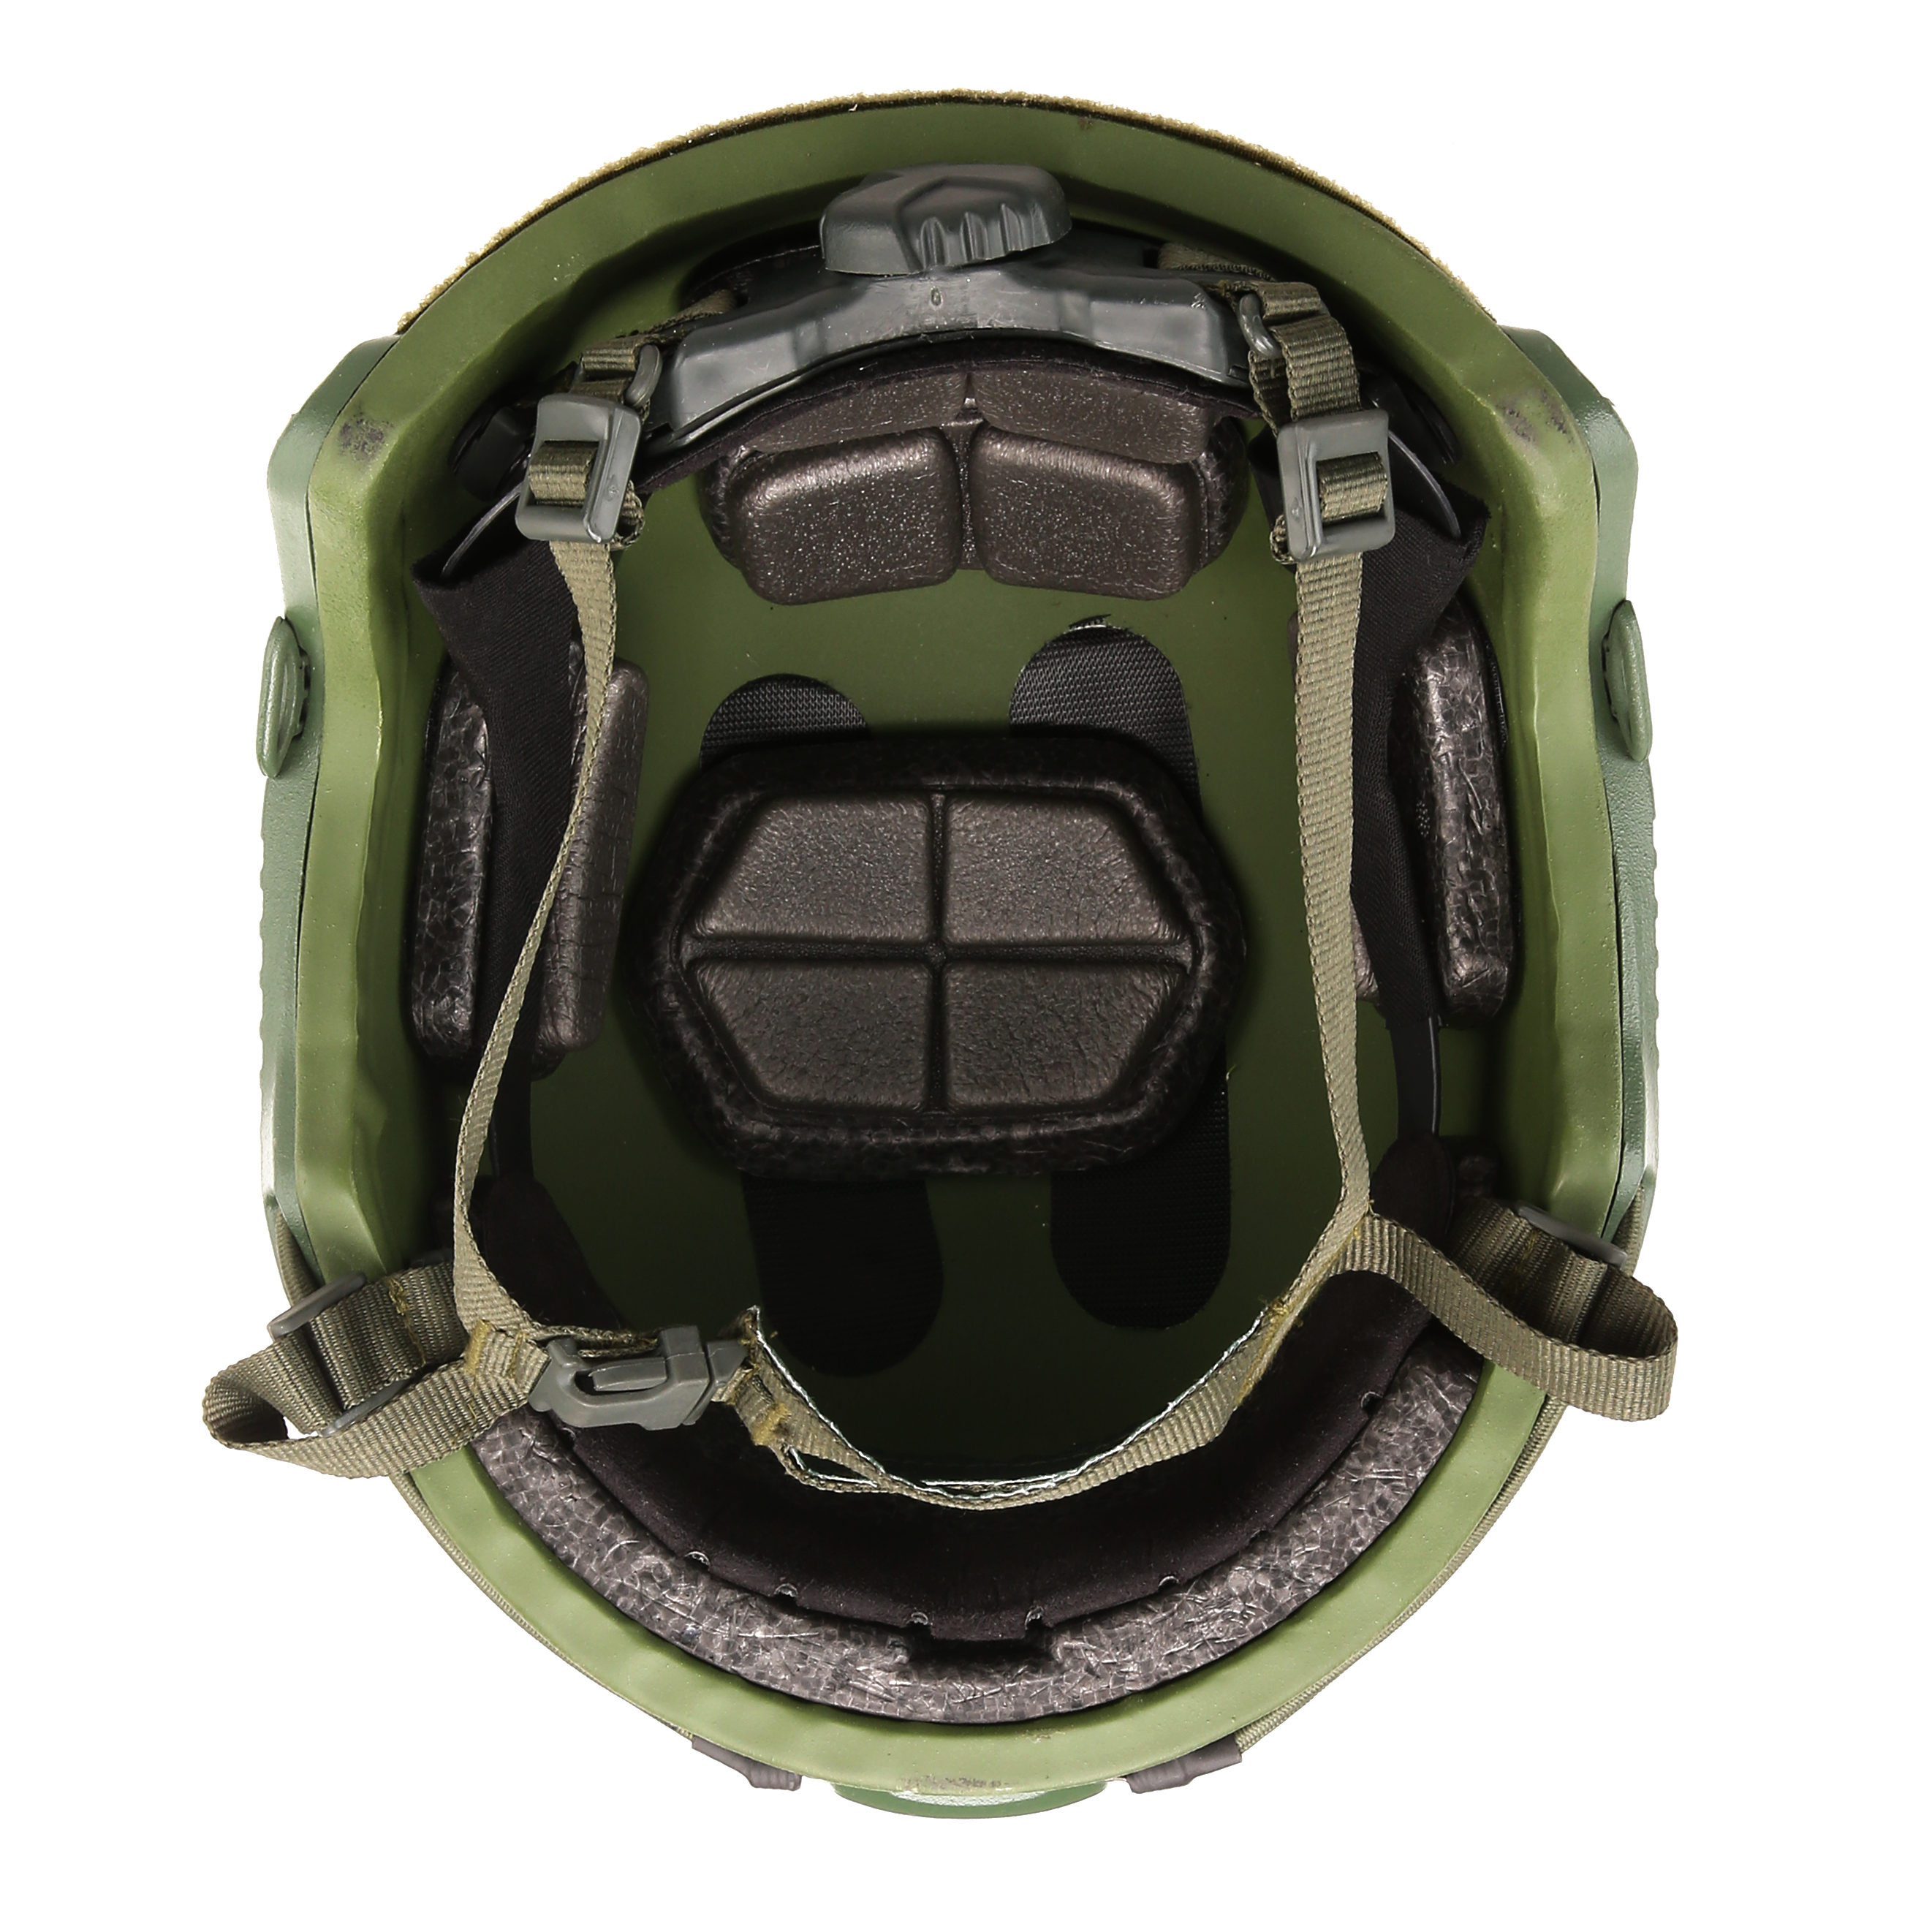 Primary Combat for Army/Law Enforcement Helmet